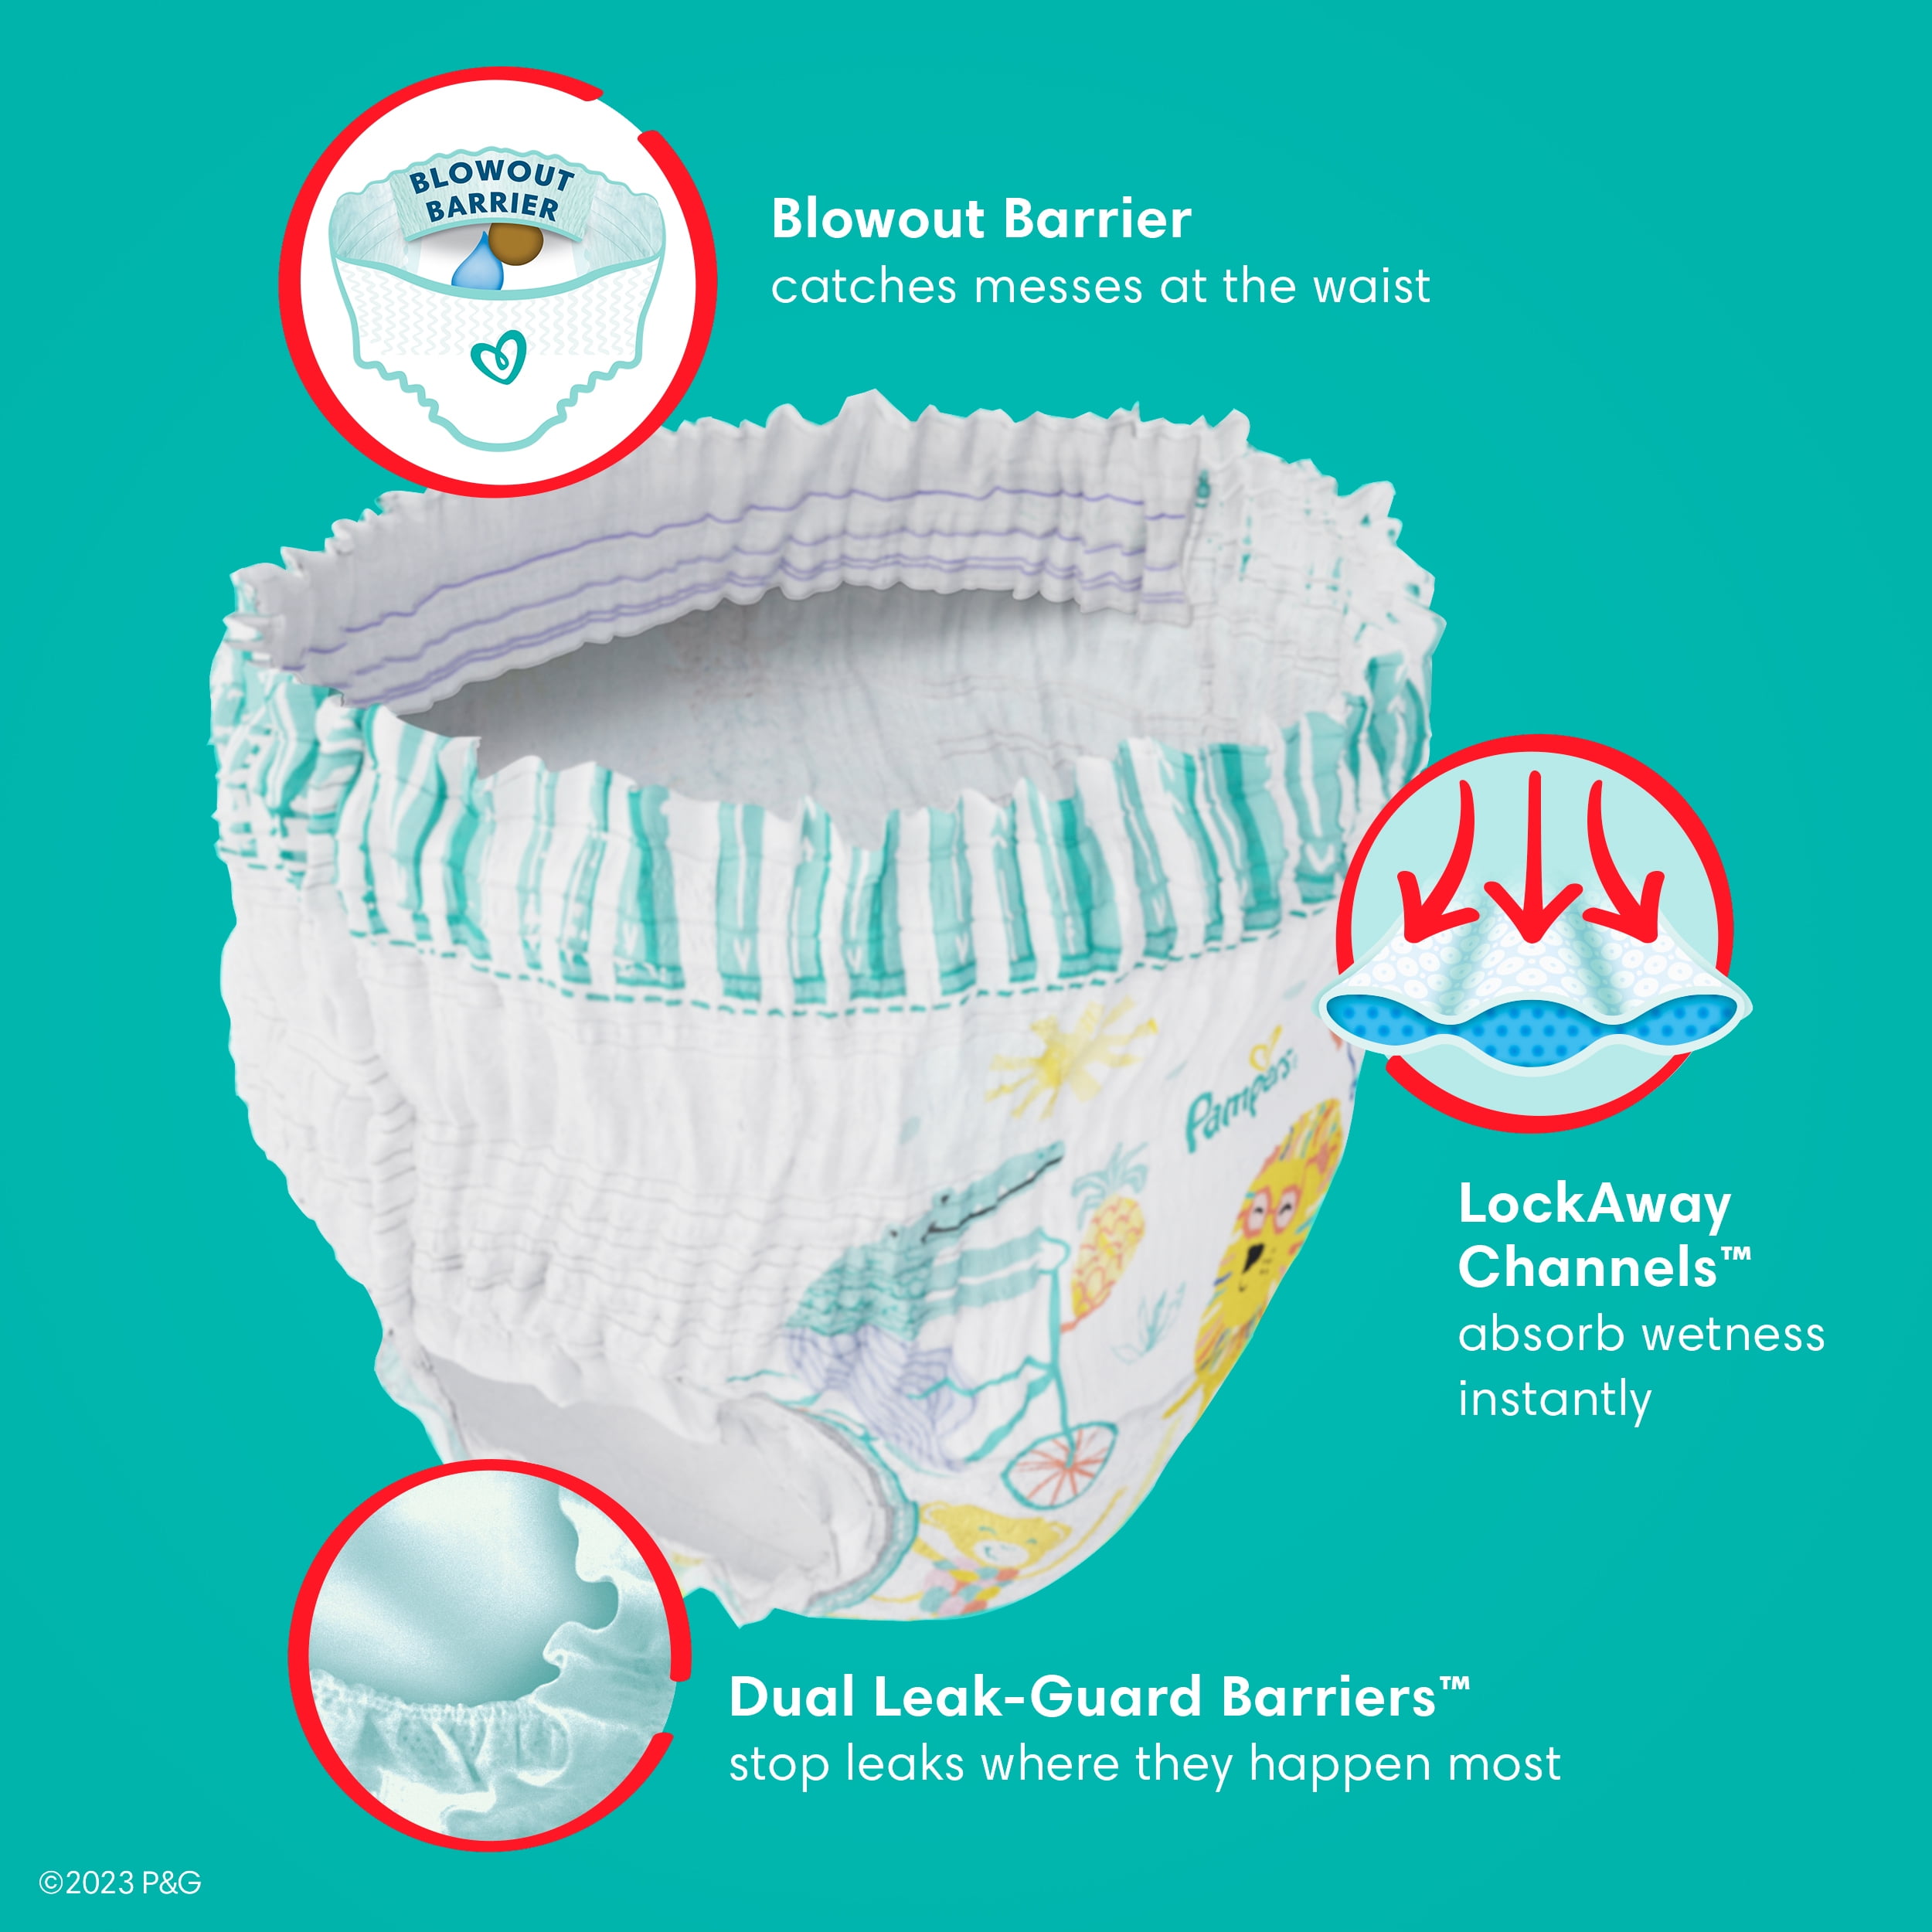 DODOT Pants Diaper-Panty Size 6, 27 Diapers, 15 kg, 360° Anti-Fugas Fit :  : Baby Products